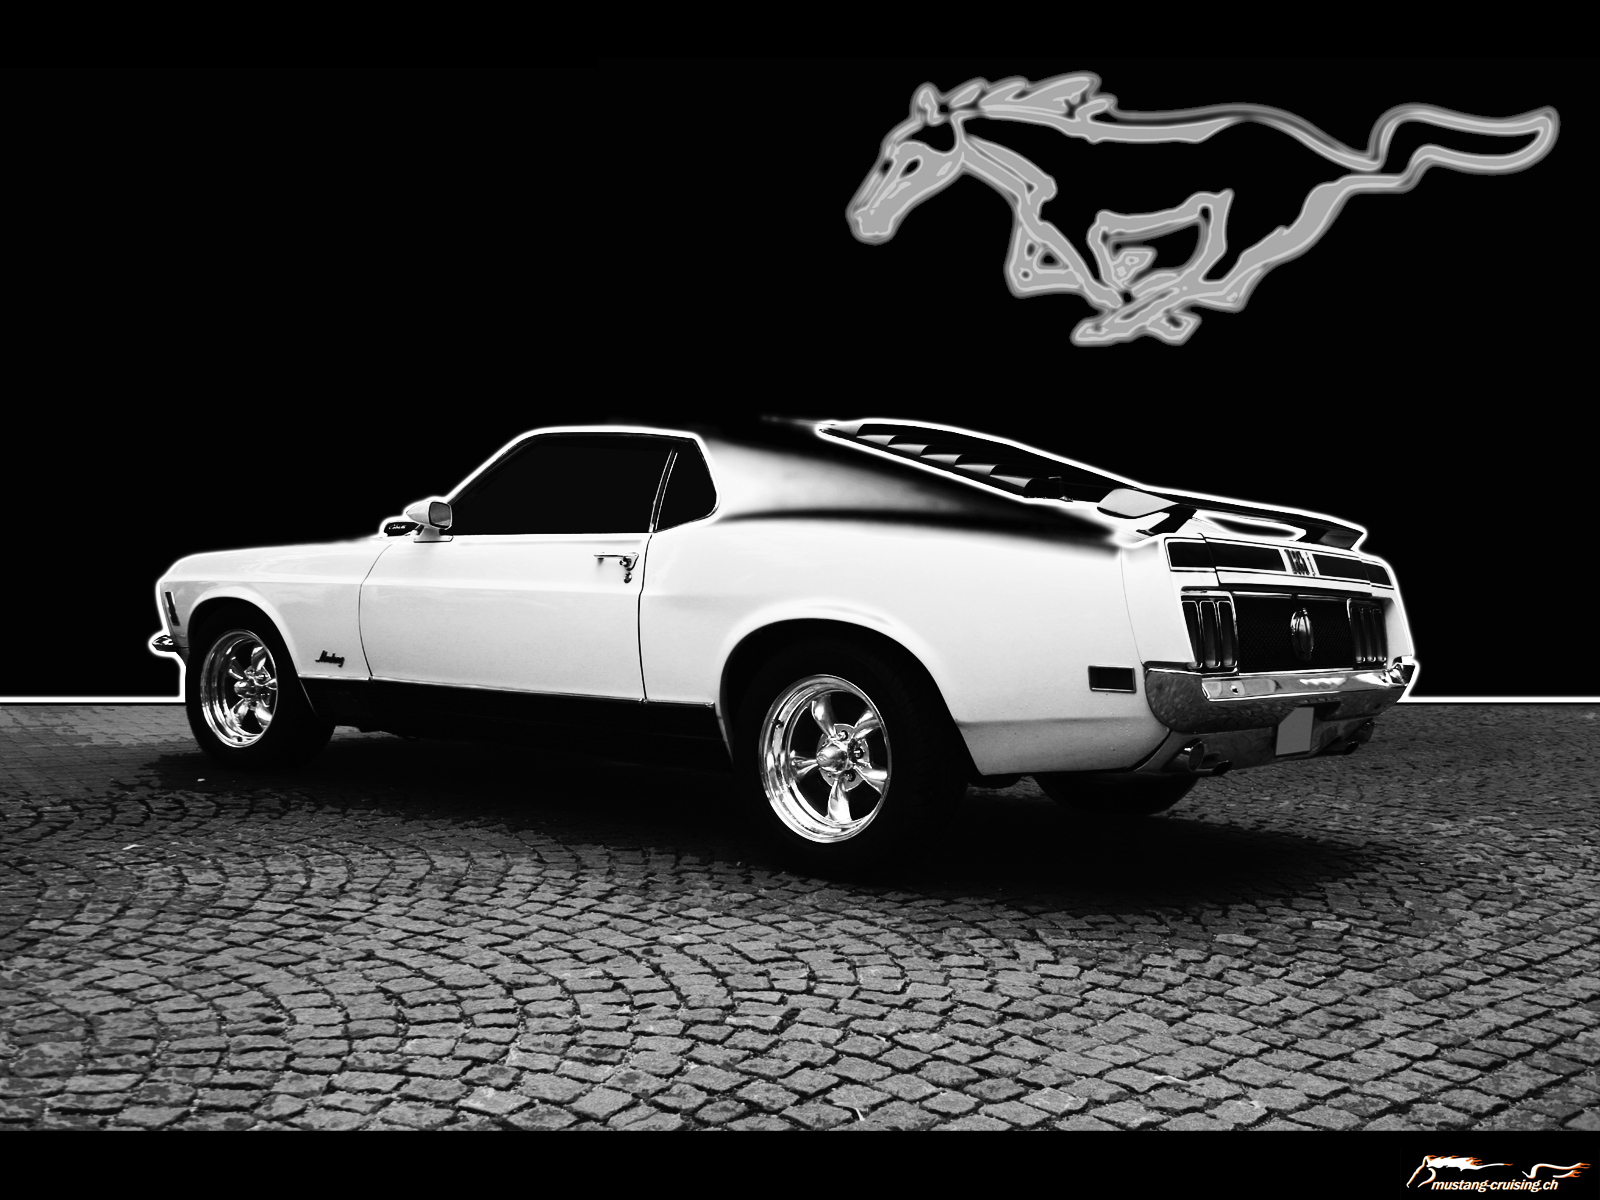 Jen's Photoshop Mustang wallpapers - Page 3 - The Mustang Source ...